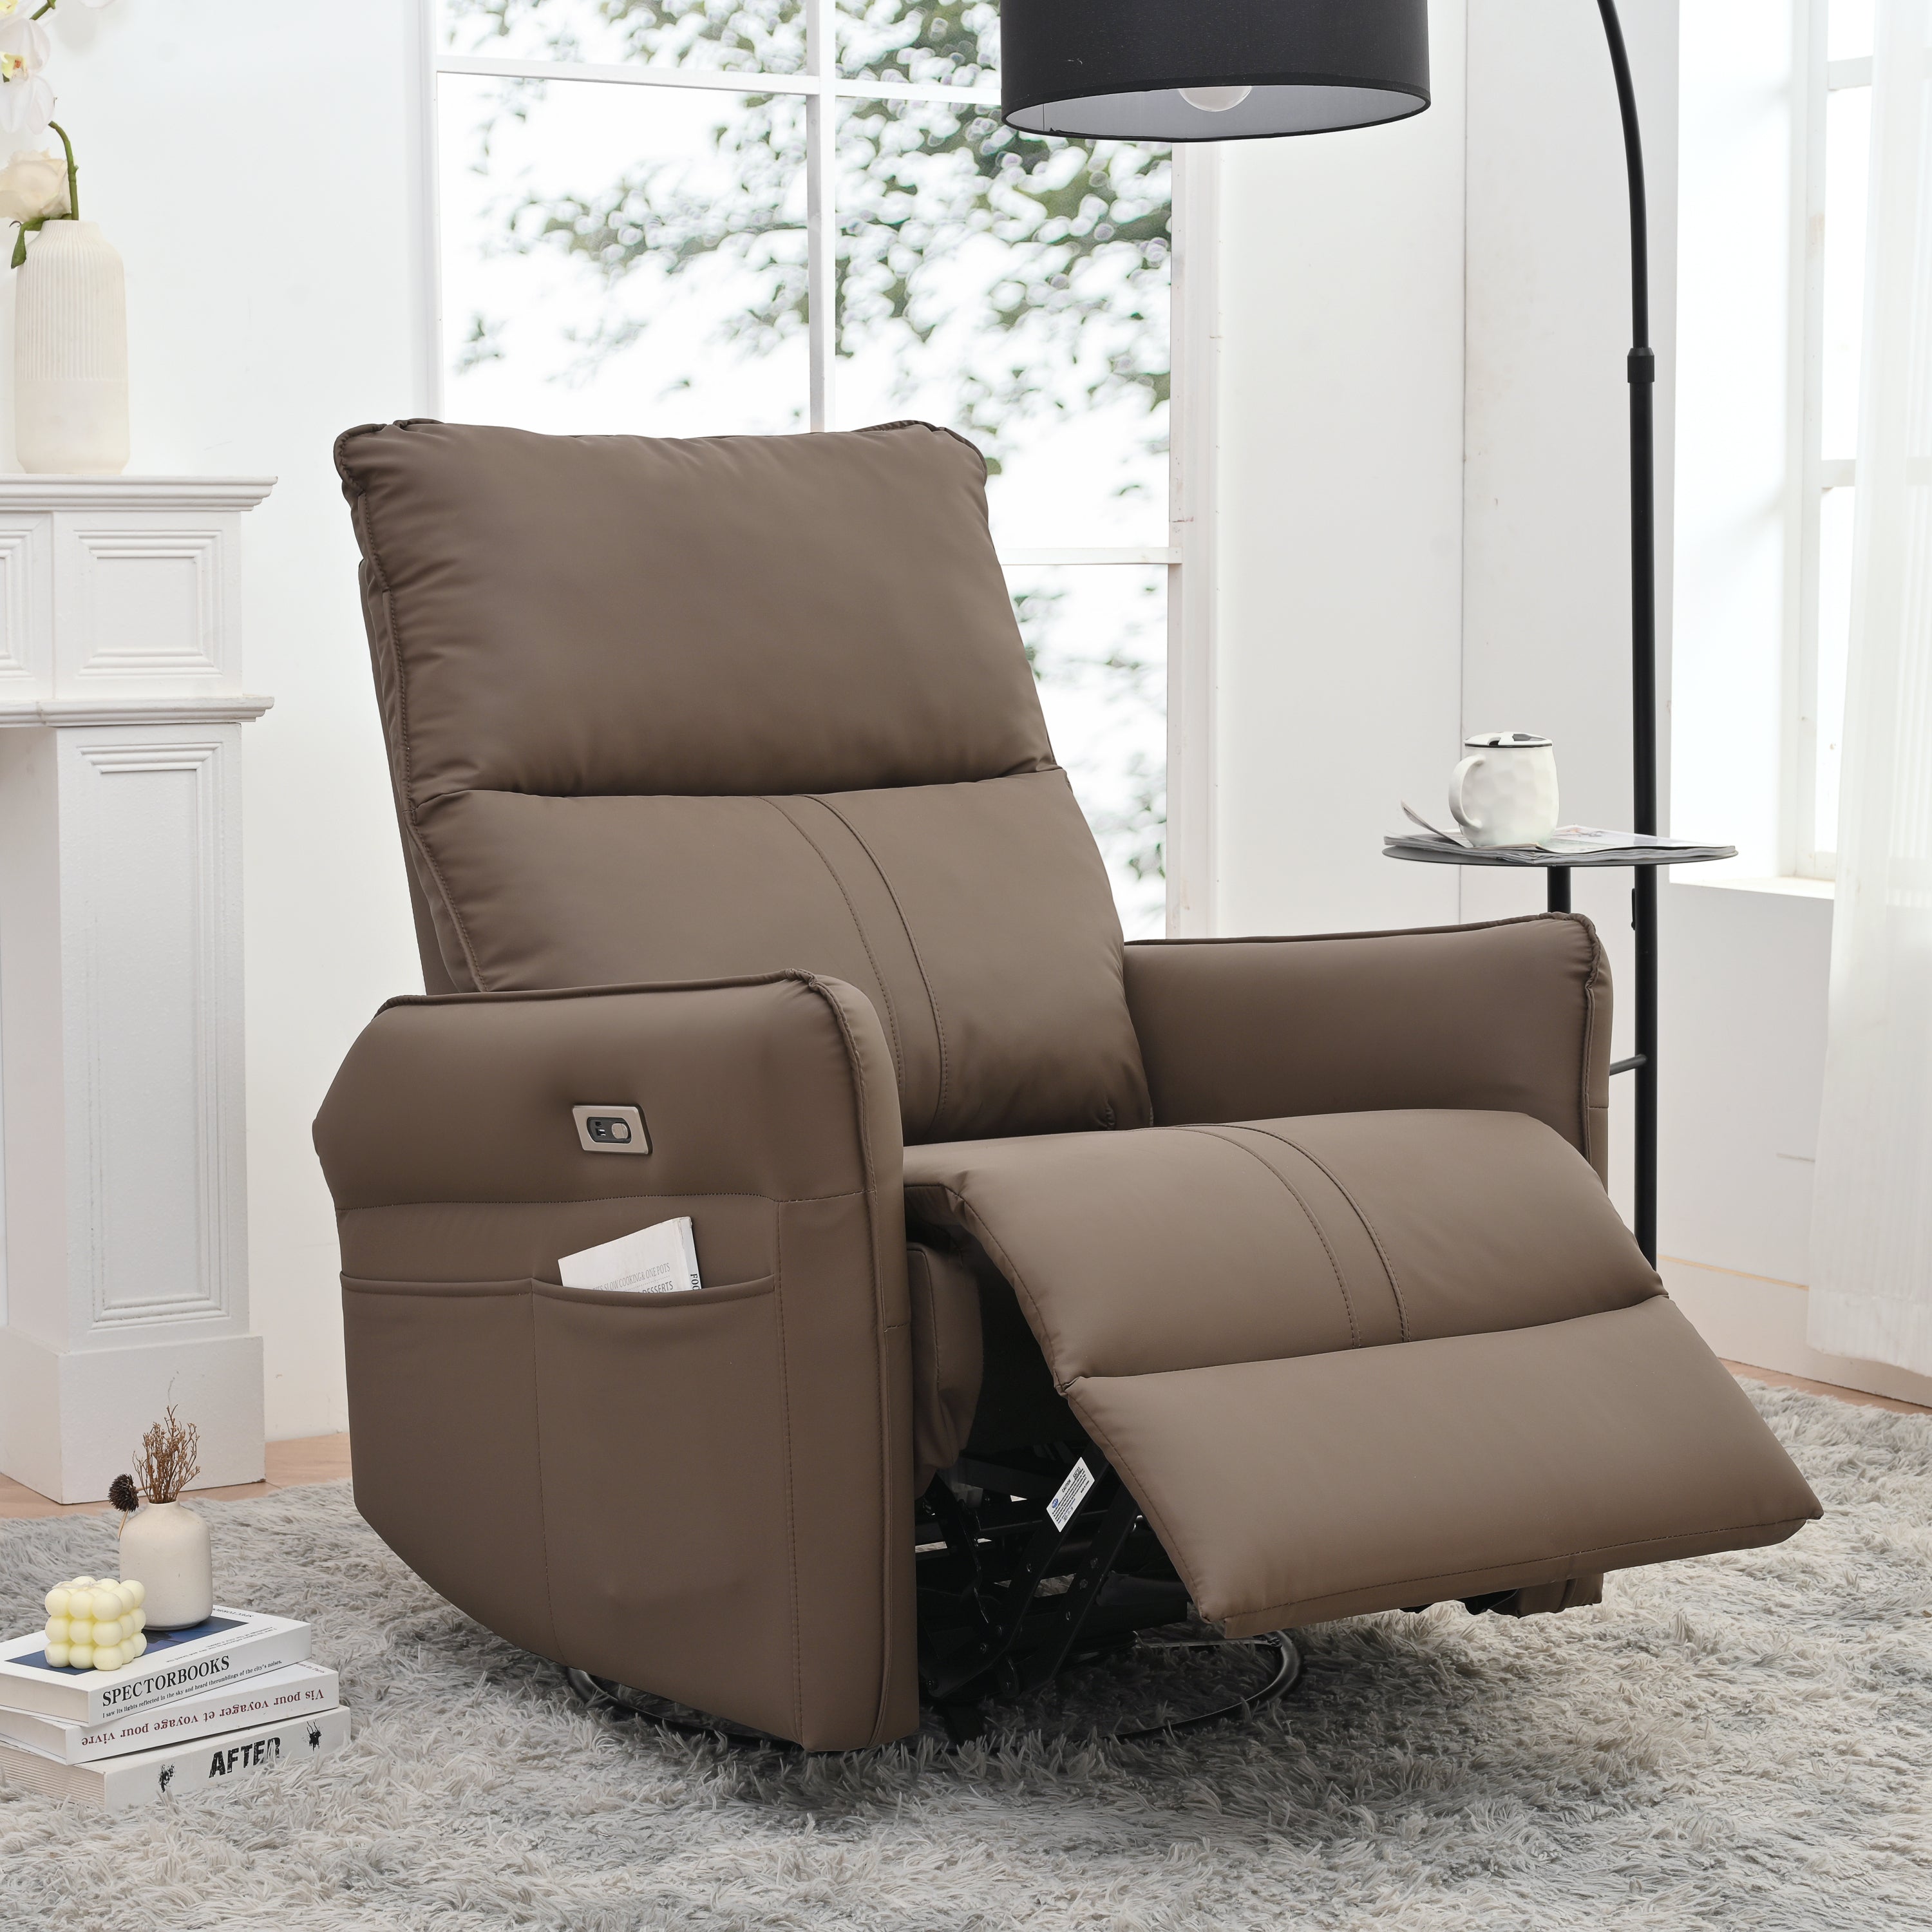 270° Power Swivel Rocker Recliner Chair, Electric Glider Reclining Sofa with USB Ports, Power Swivel Glider, Rocking Chair Nursery Recliners for Living Room Bedroom(Brown)